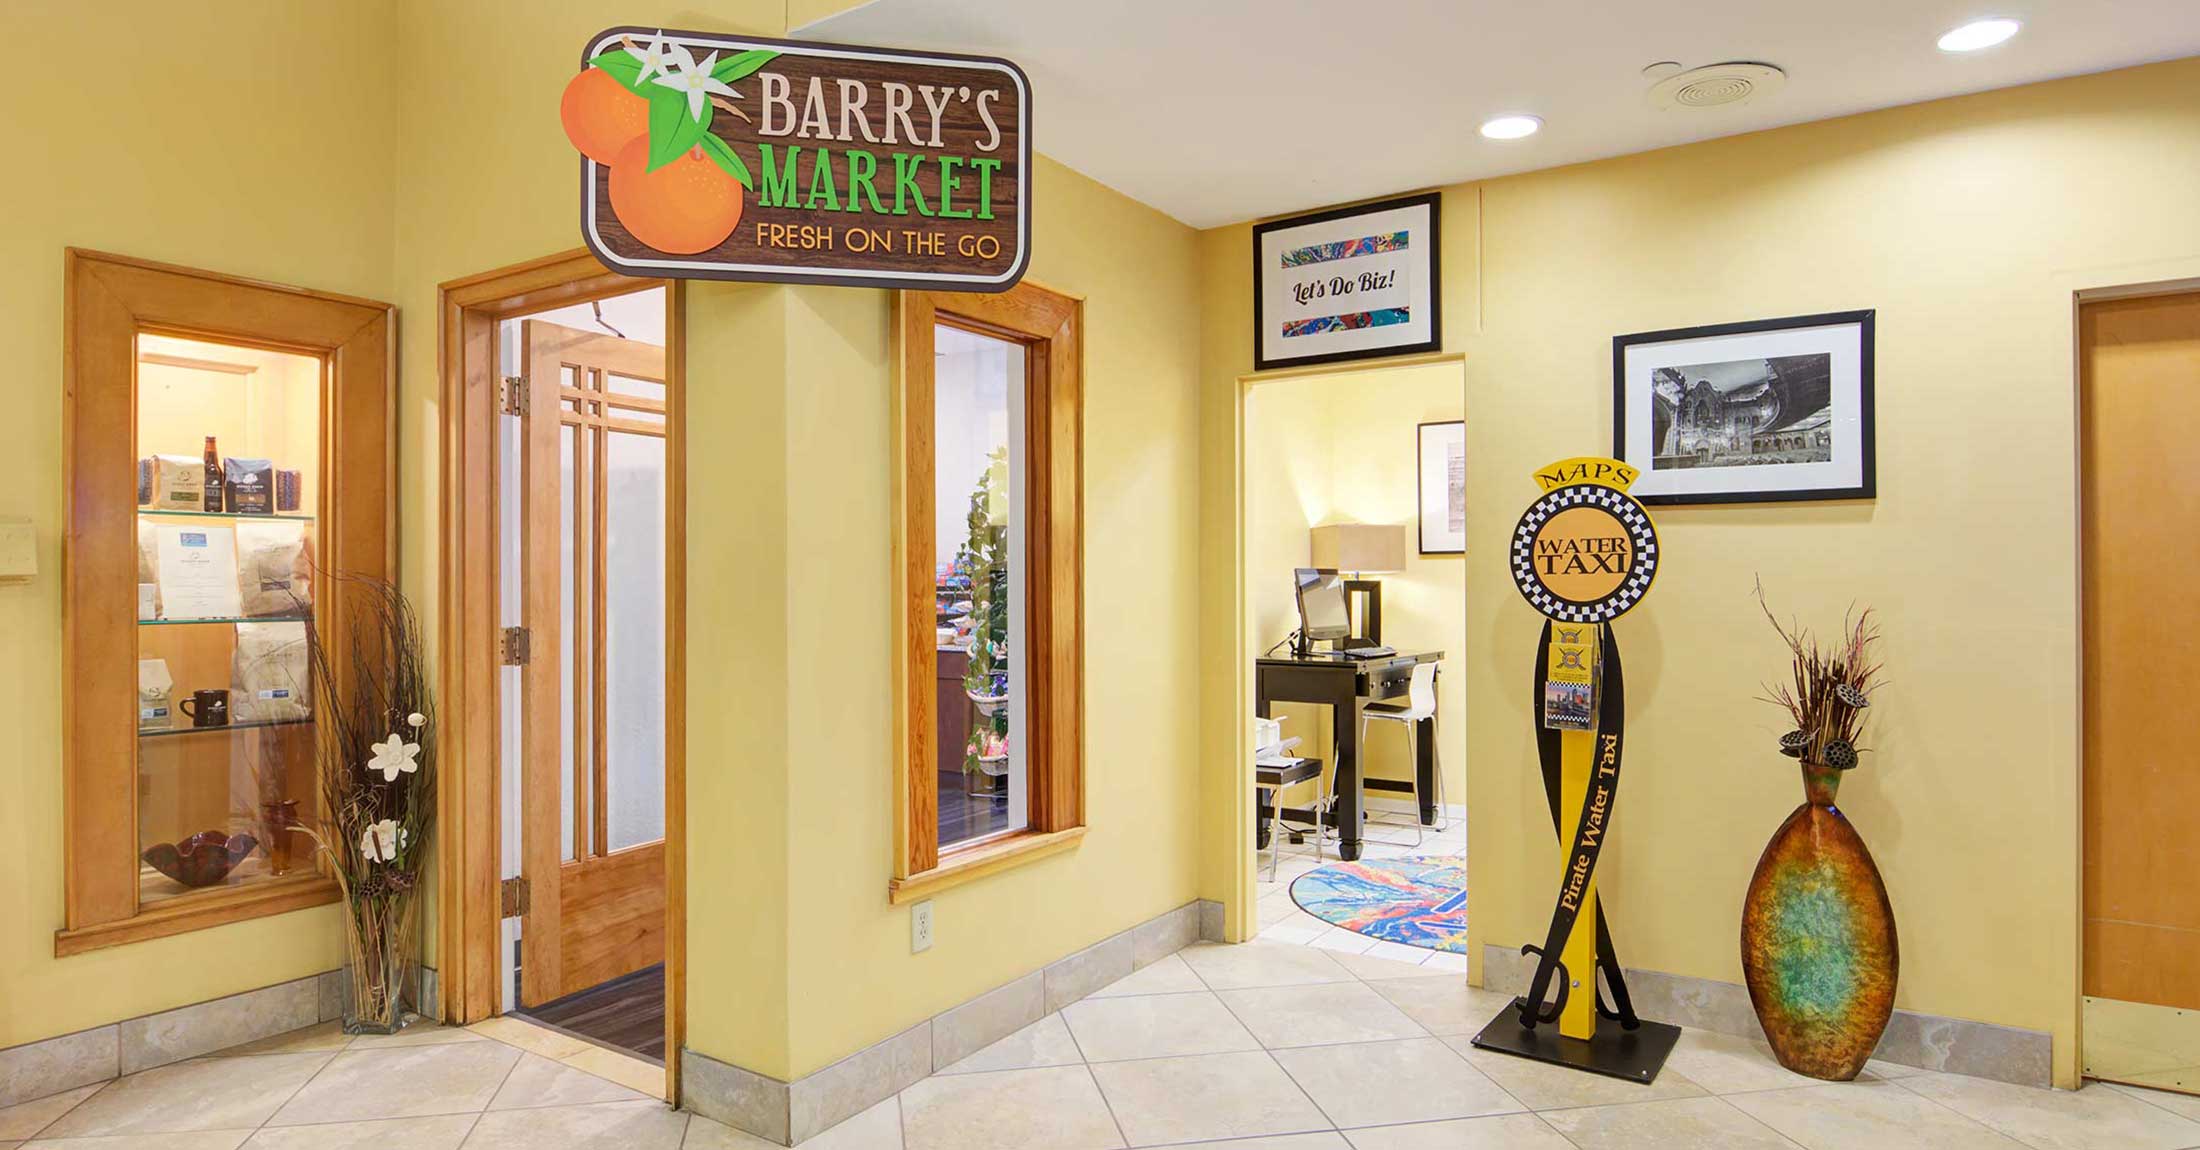 entrance to barry's market grab and go market and business center